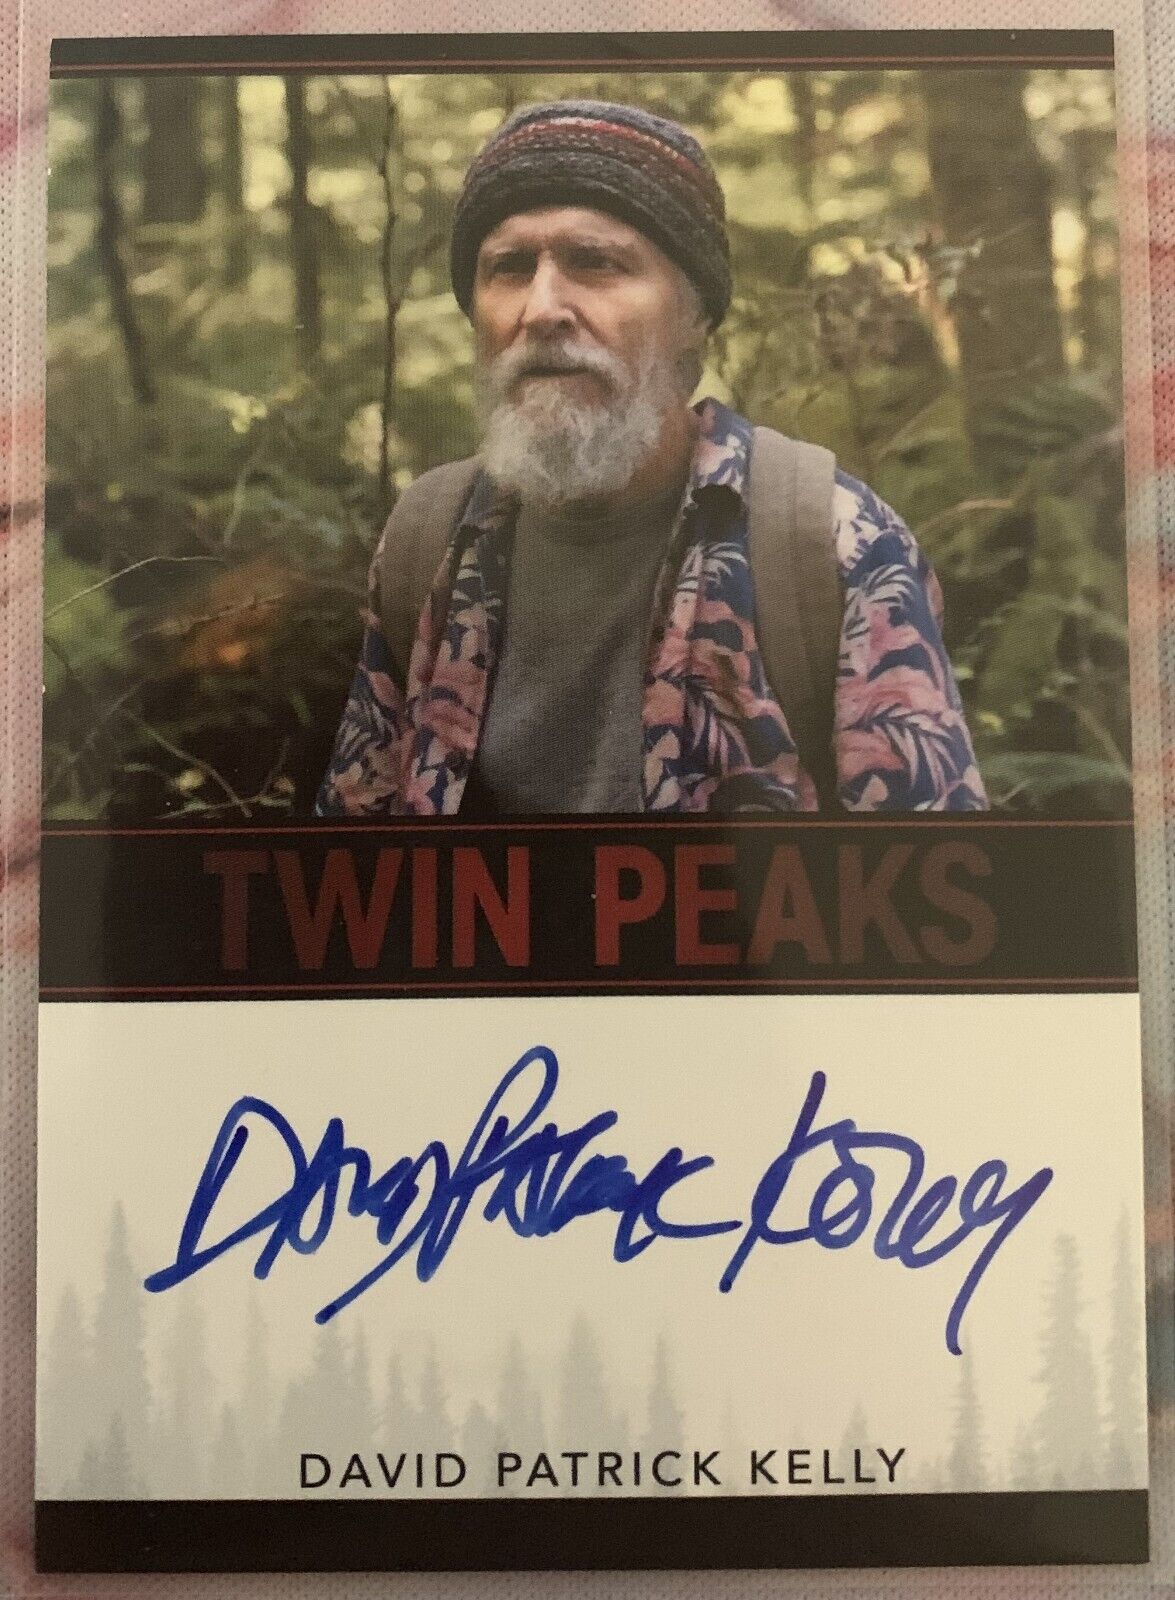 Twin Peaks Archives 2019 - David Patrick Kelly as Jerry Horne - Signed Card (2)